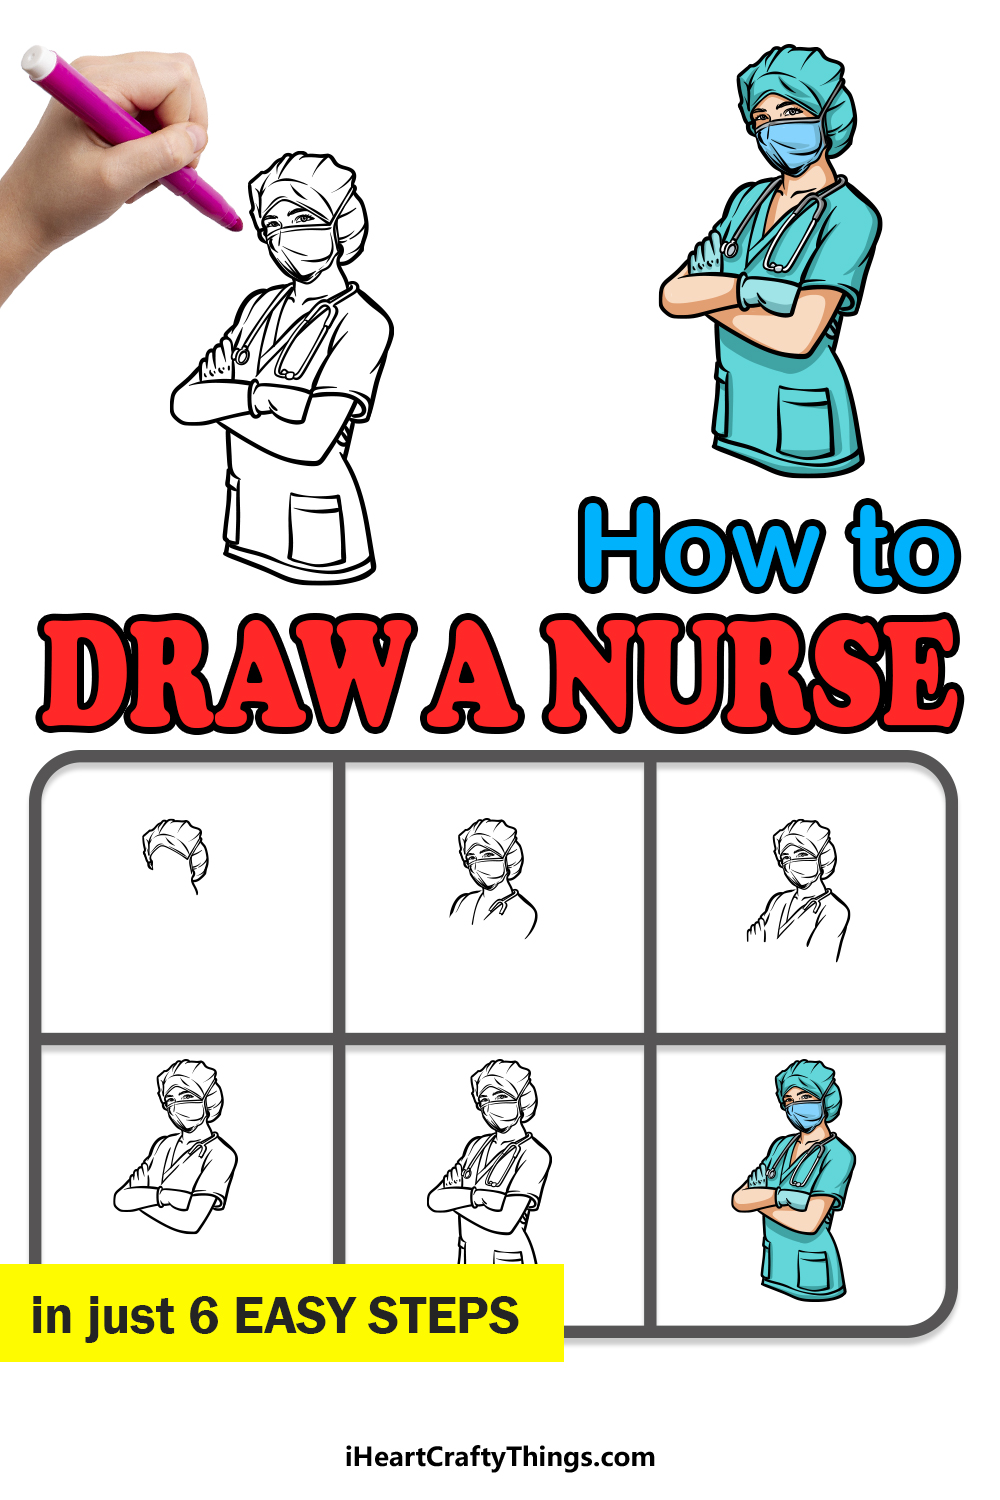 how to draw a nurse in 6 easy steps